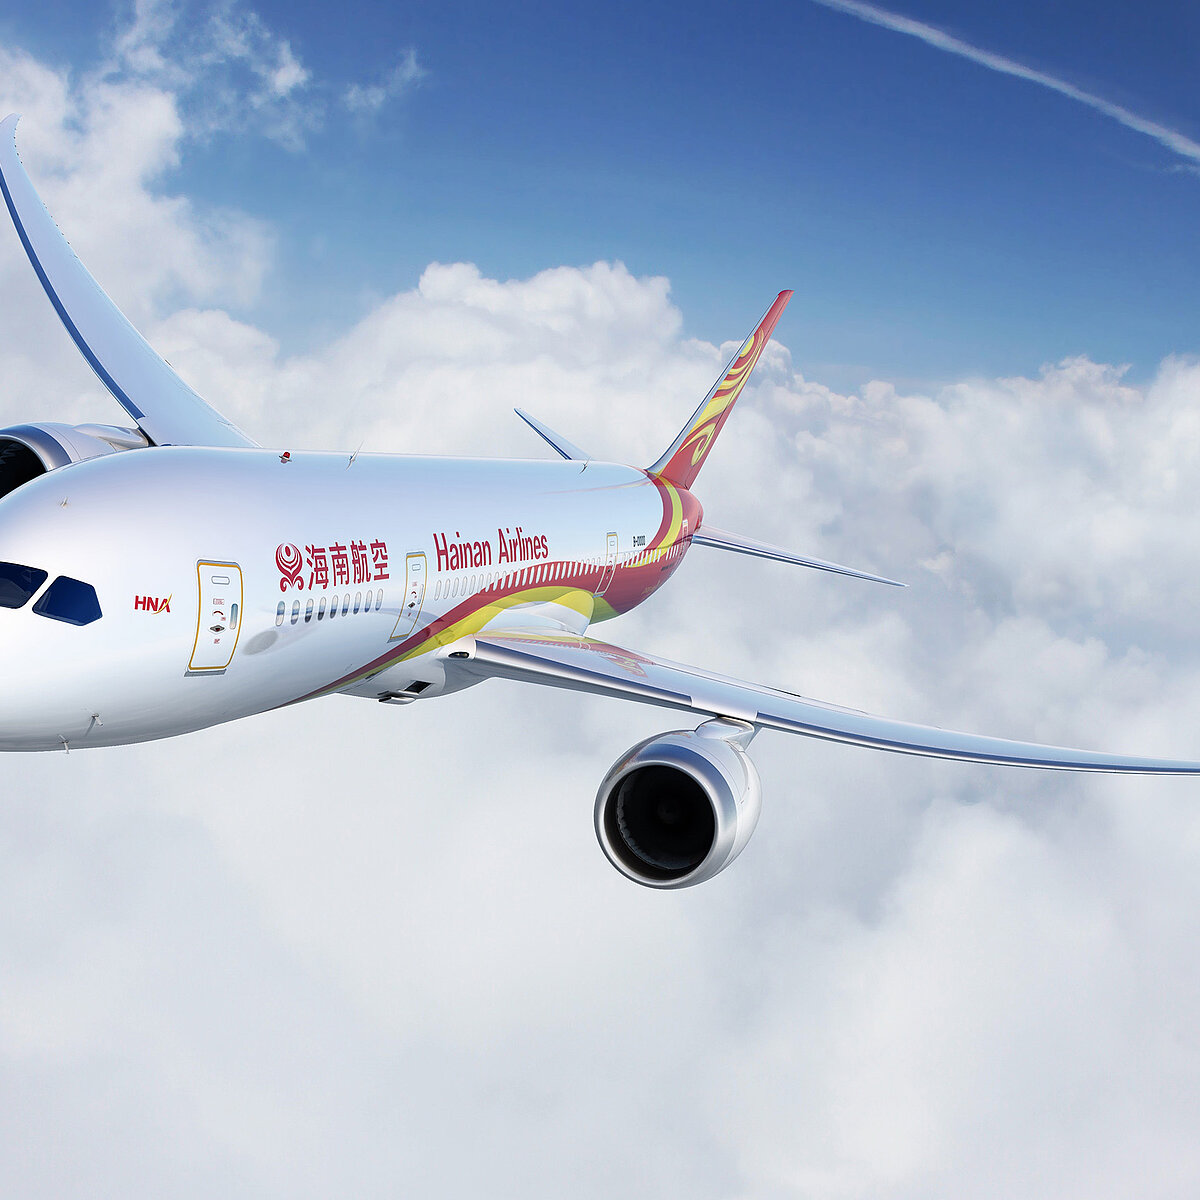 Aircraft from Hainan Airlines